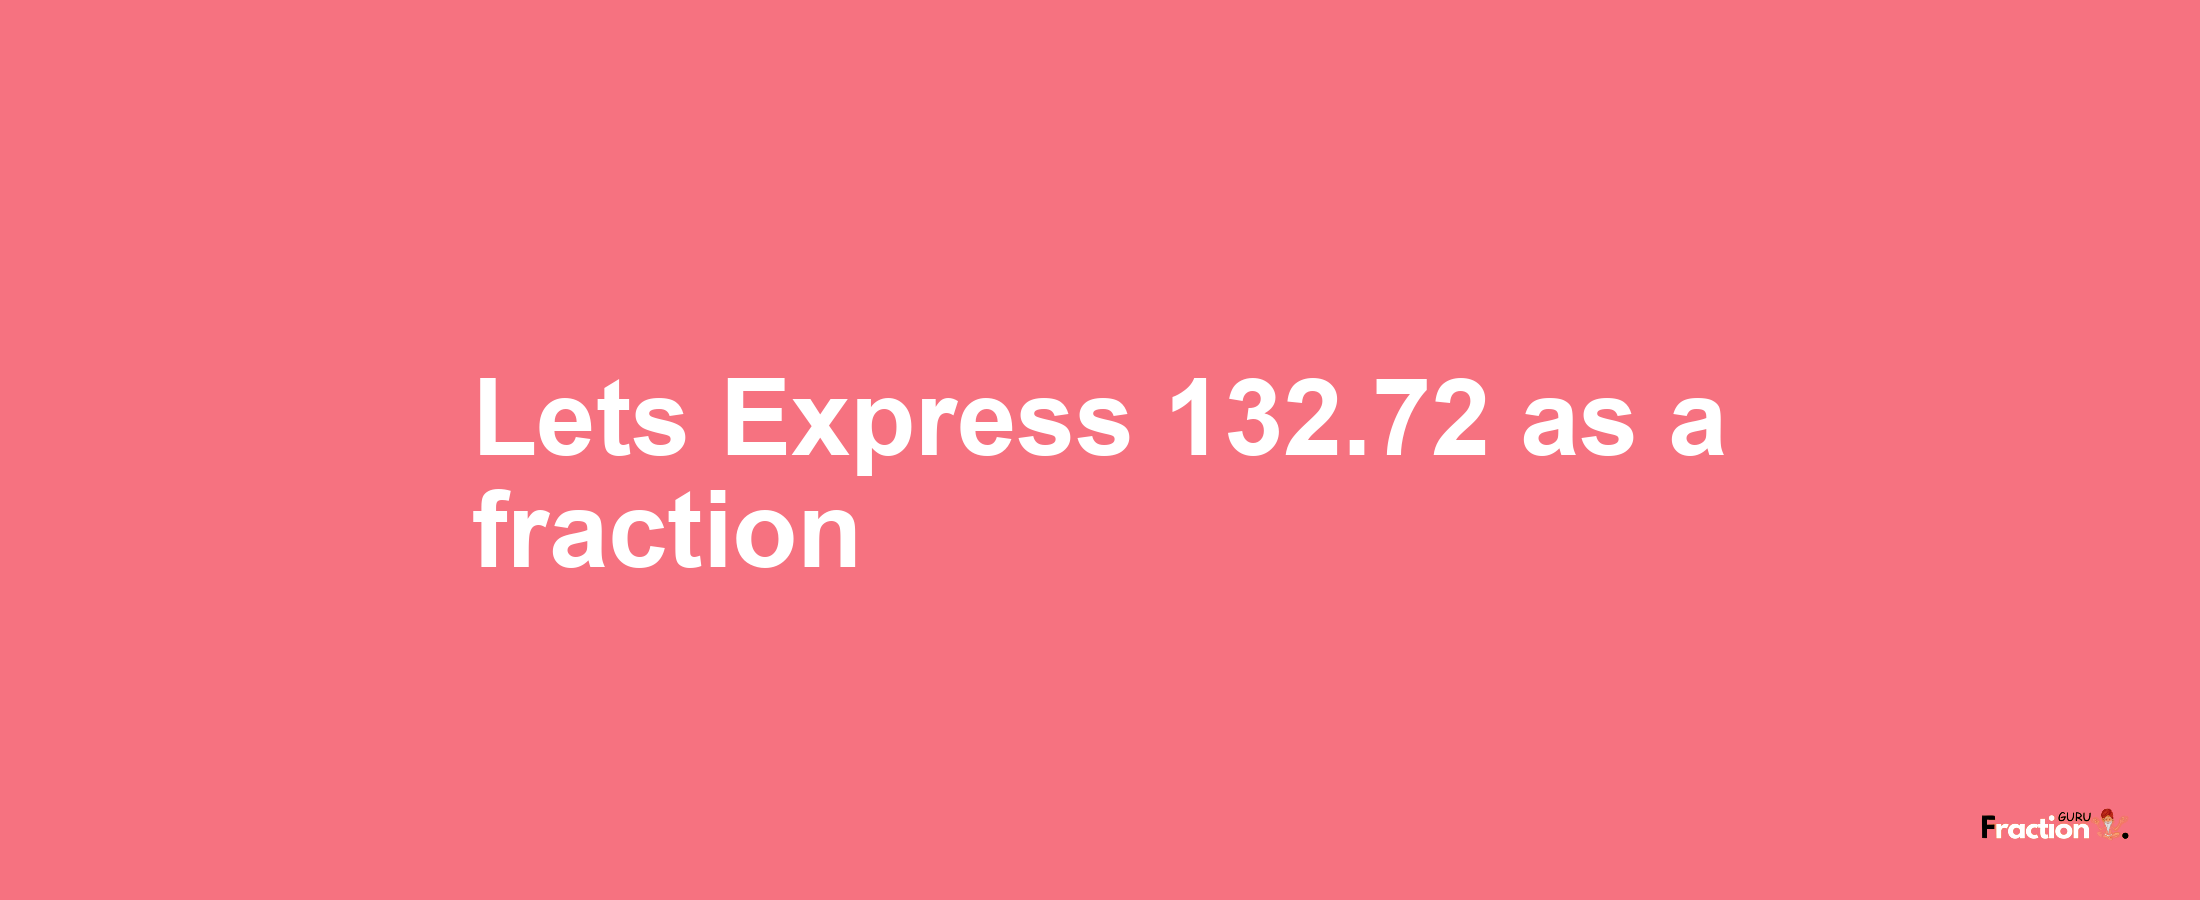 Lets Express 132.72 as afraction